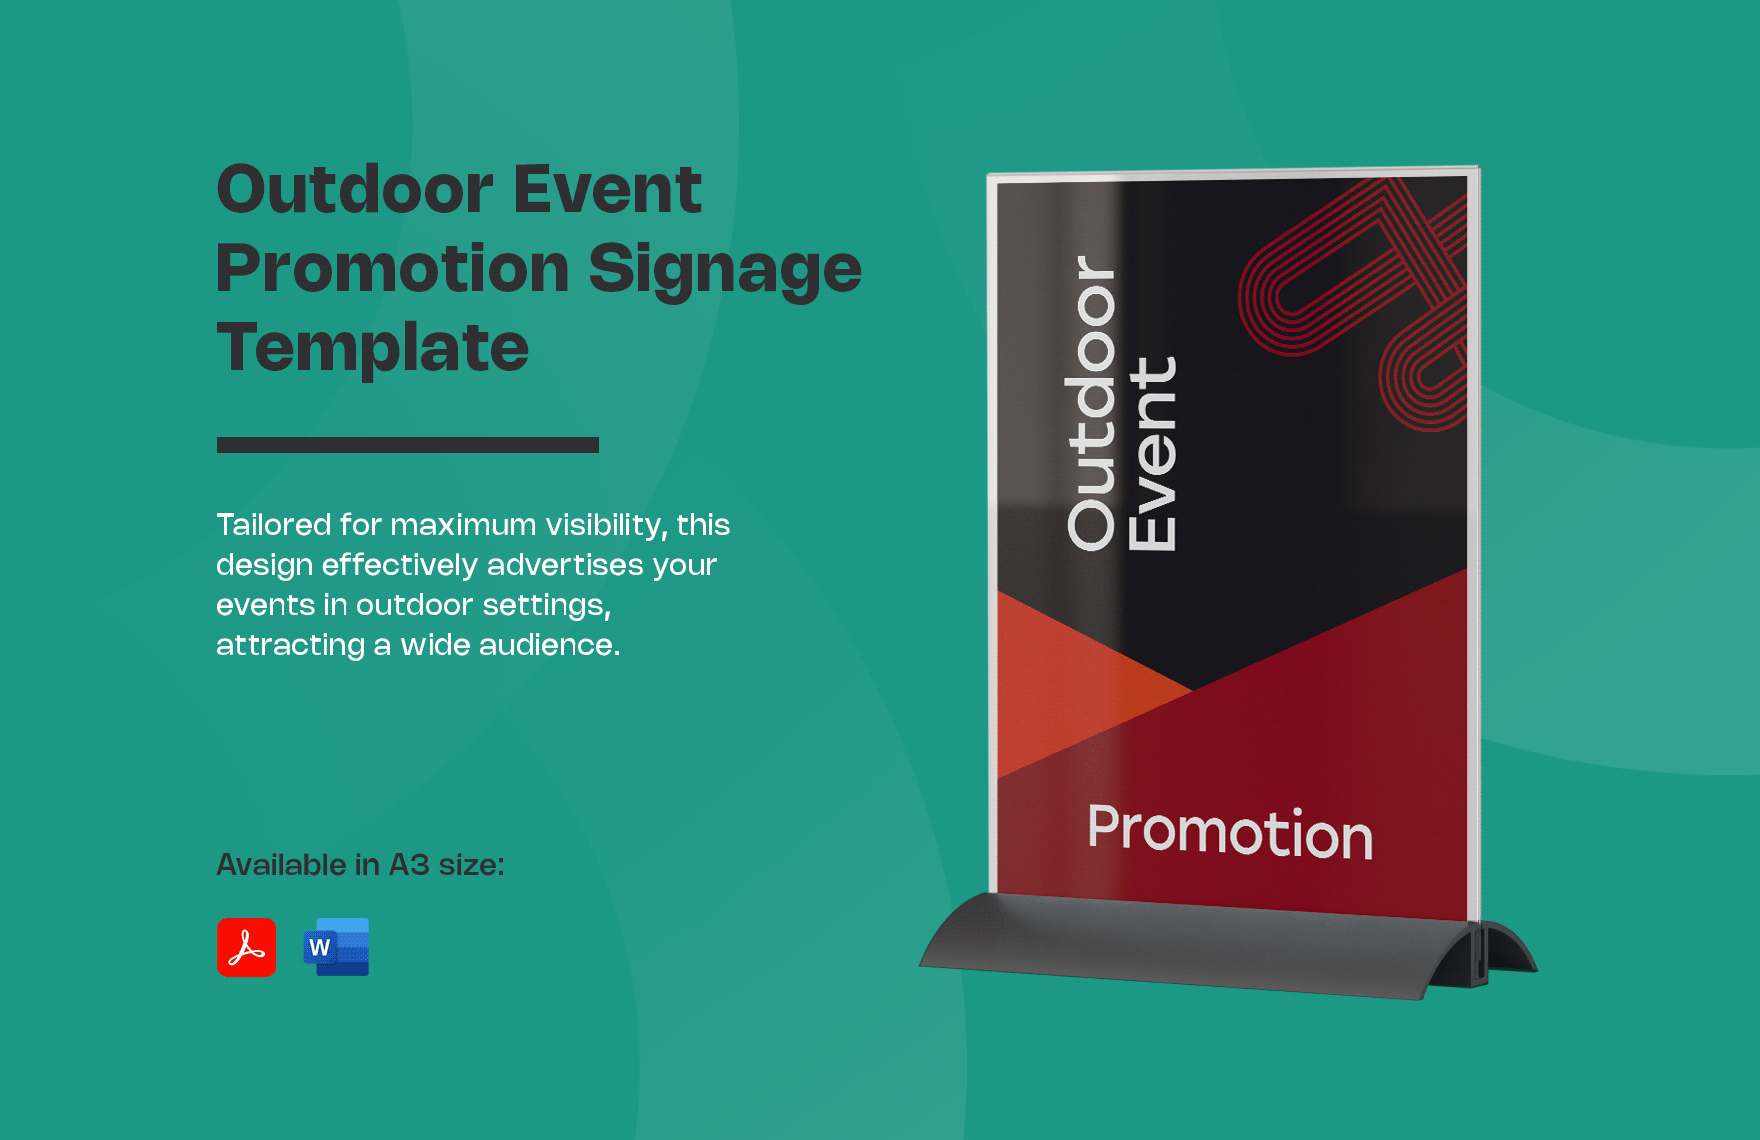 Outdoor Event Promotion Signage Template